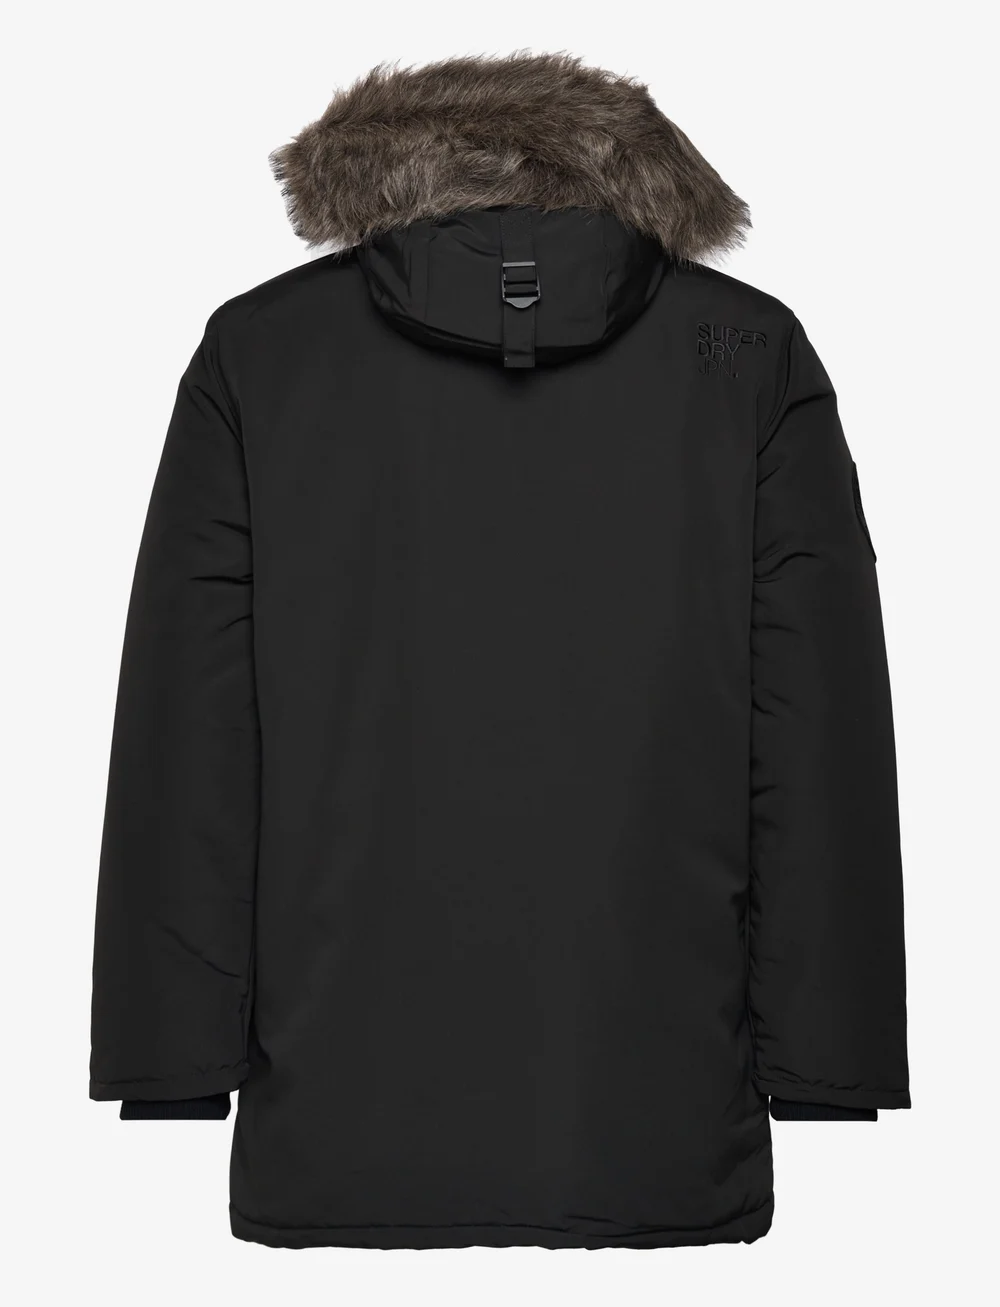 Superdry Everest Faux Fur Hooded Parka - 129.99 €. Buy Parkas from Superdry  online at Boozt.com. Fast delivery and easy returns